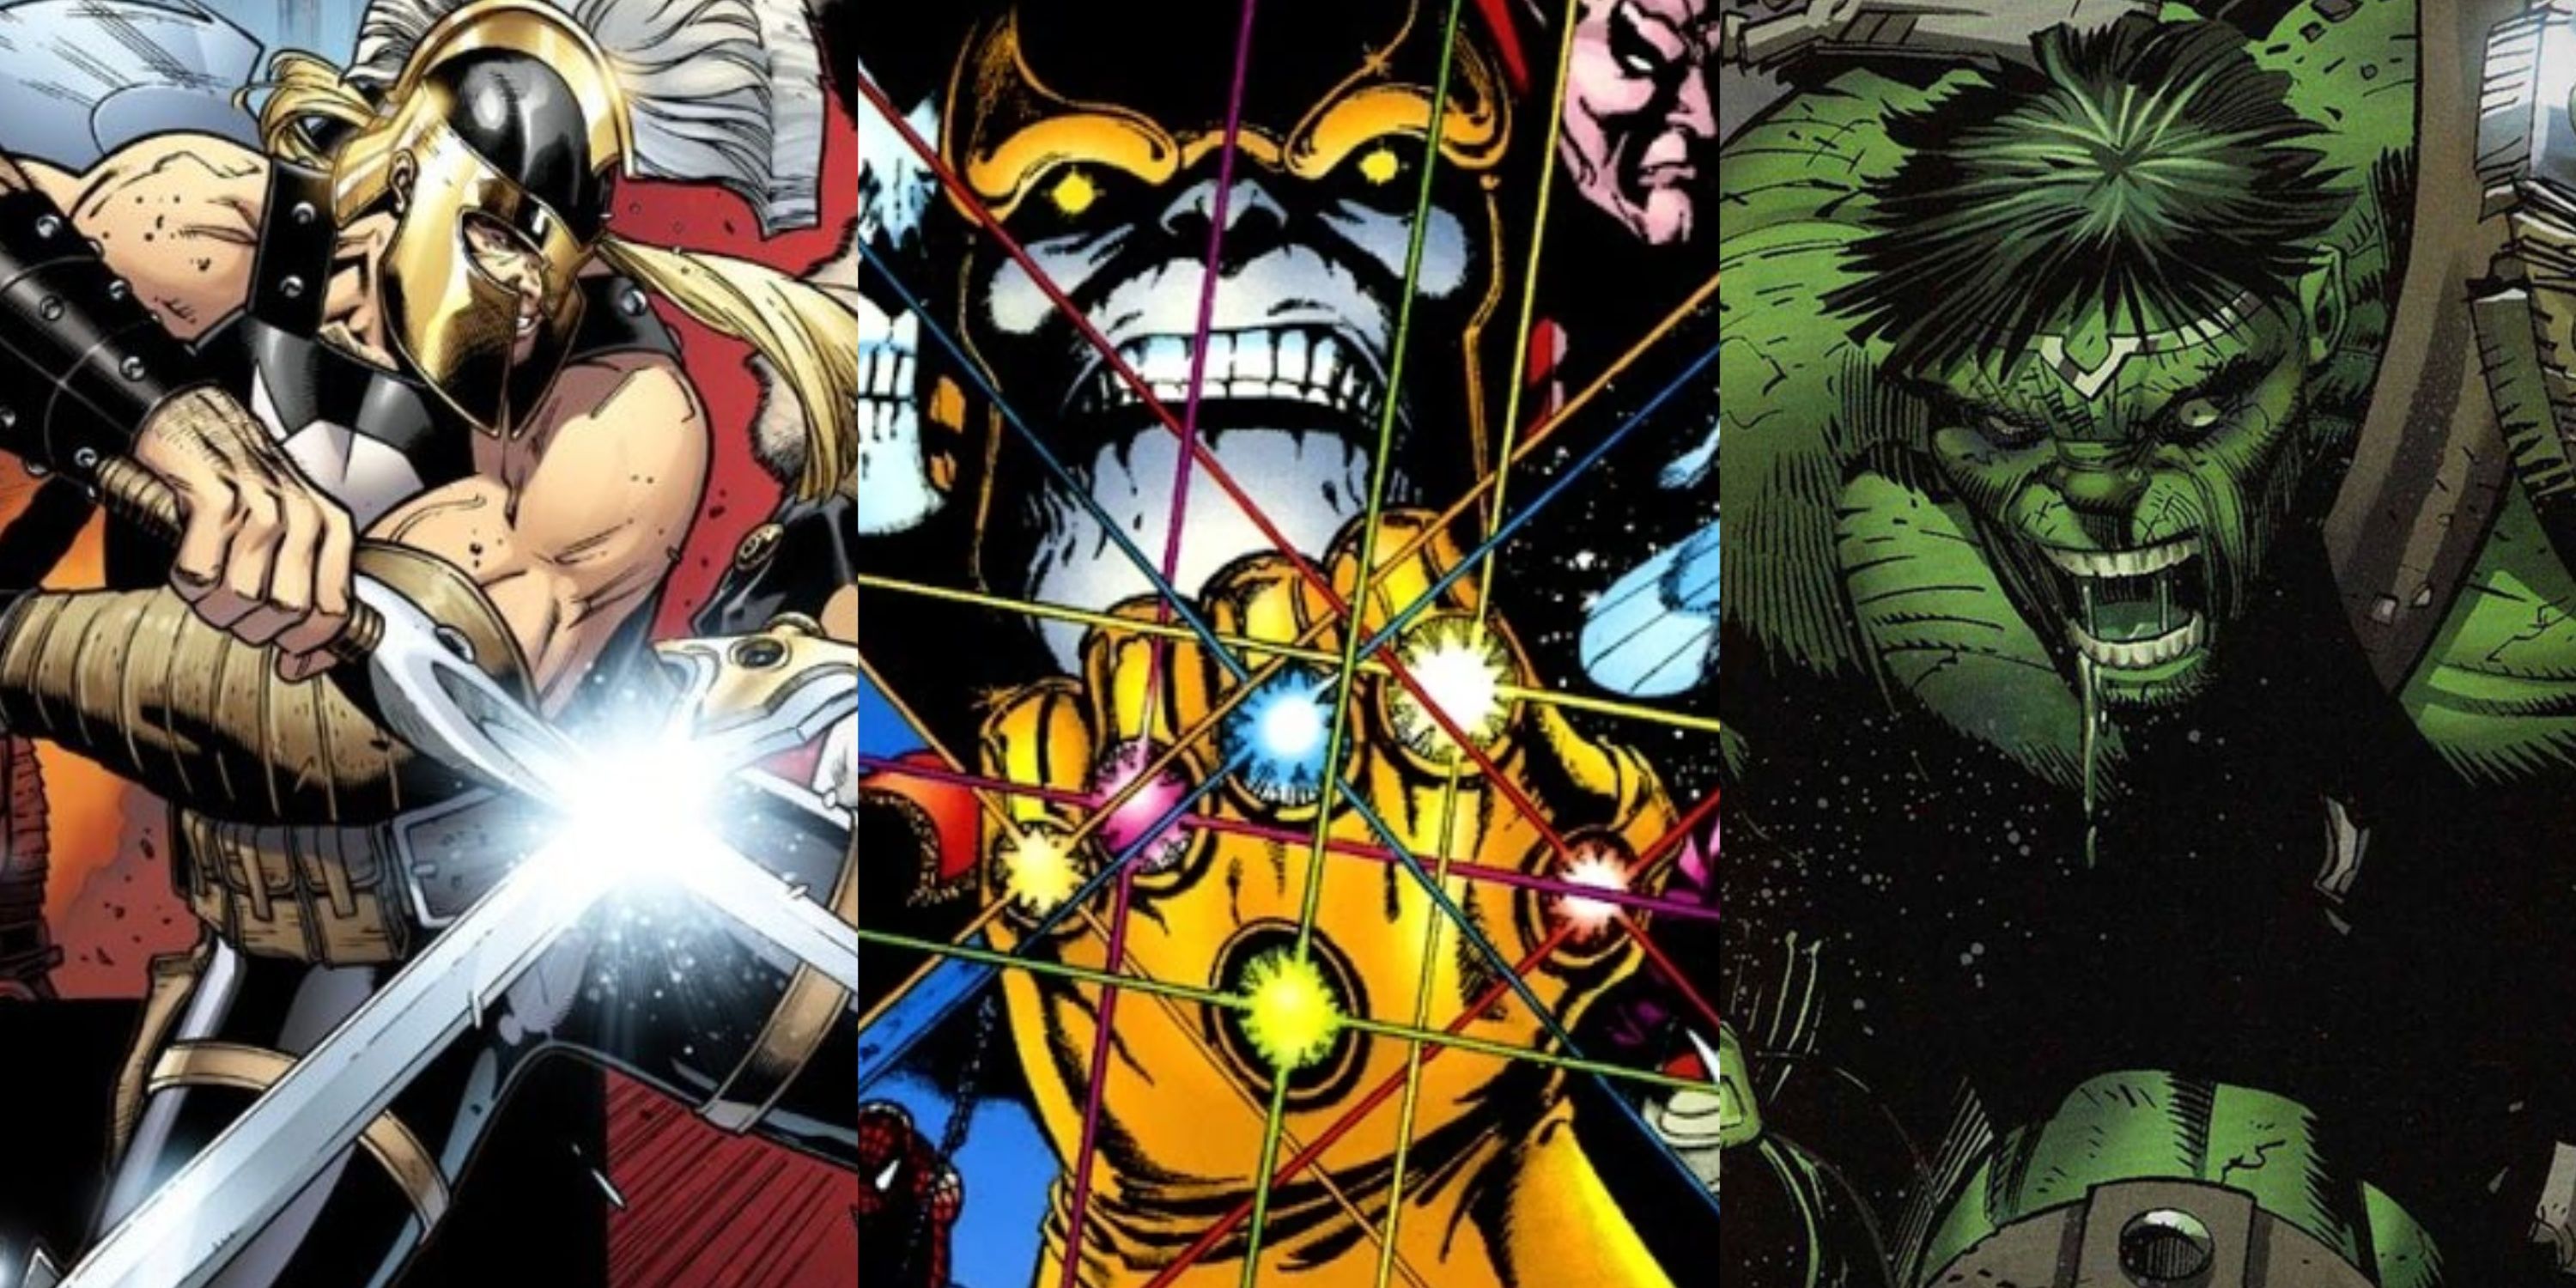 Split image of Ares, Thanos with the Infinity Gauntlet and Hulk in Marvel comics